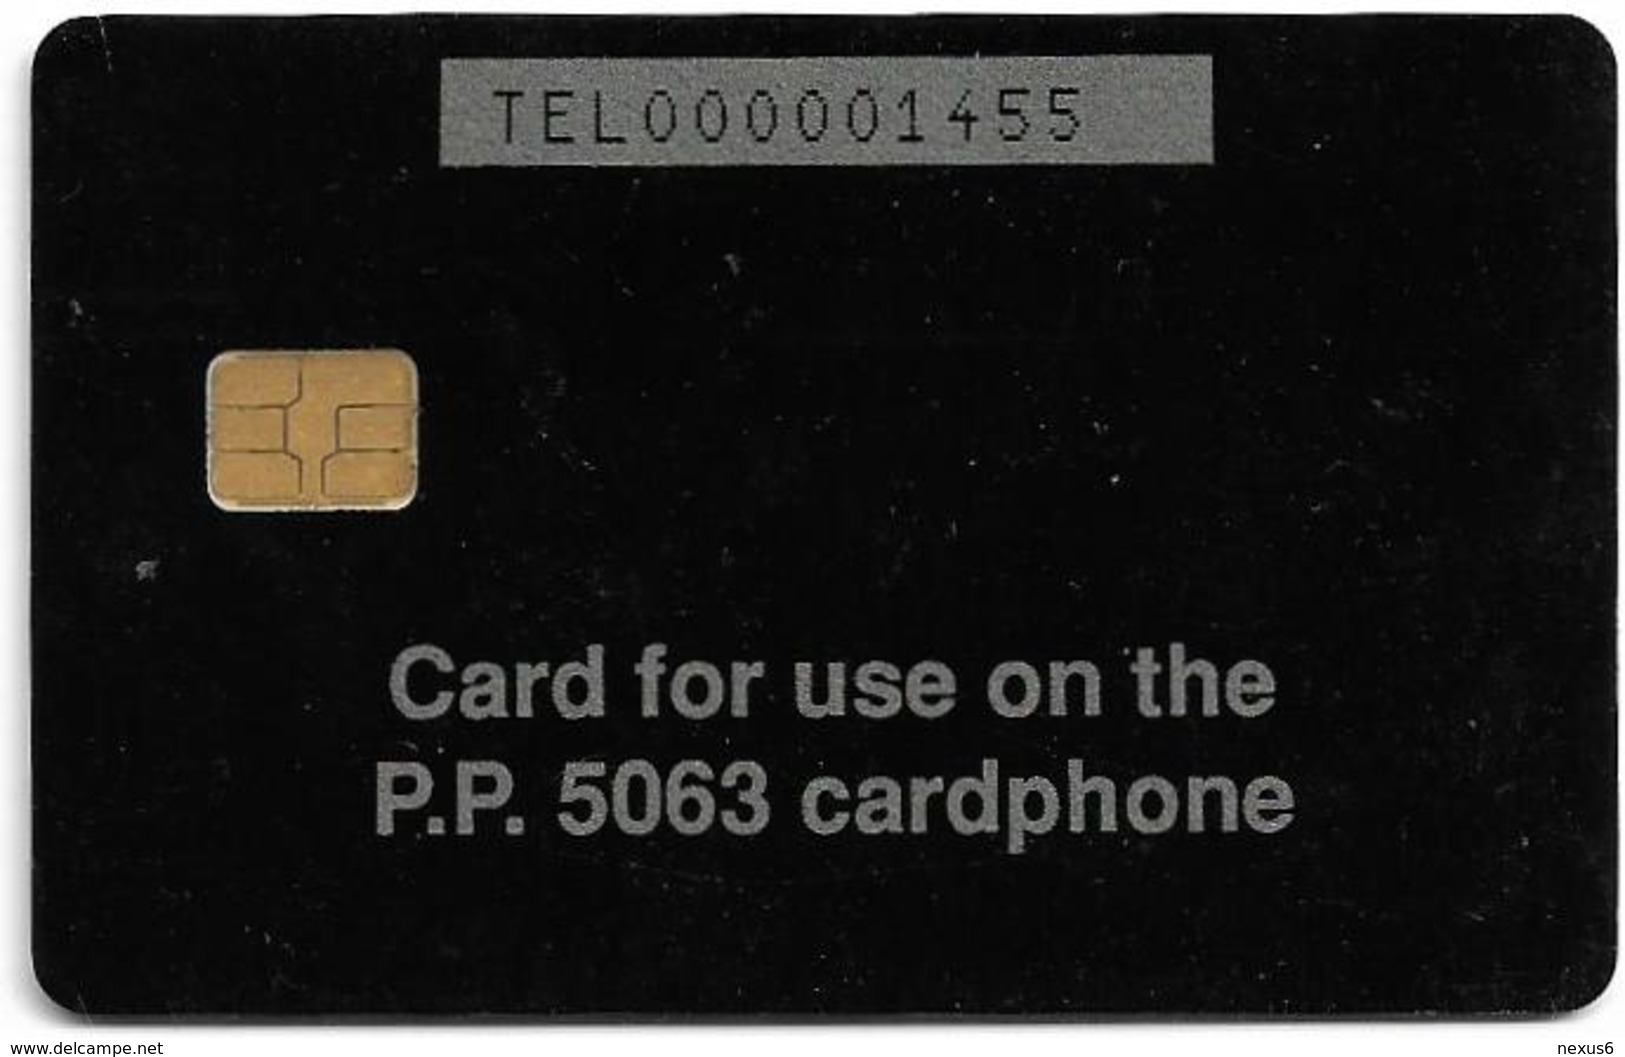 S. Africa - Telkom - Card For Use On The P.P. 5063 Cardphone, Test/Trial Issue 10R, ≅ 10.000ex, Used - Suráfrica